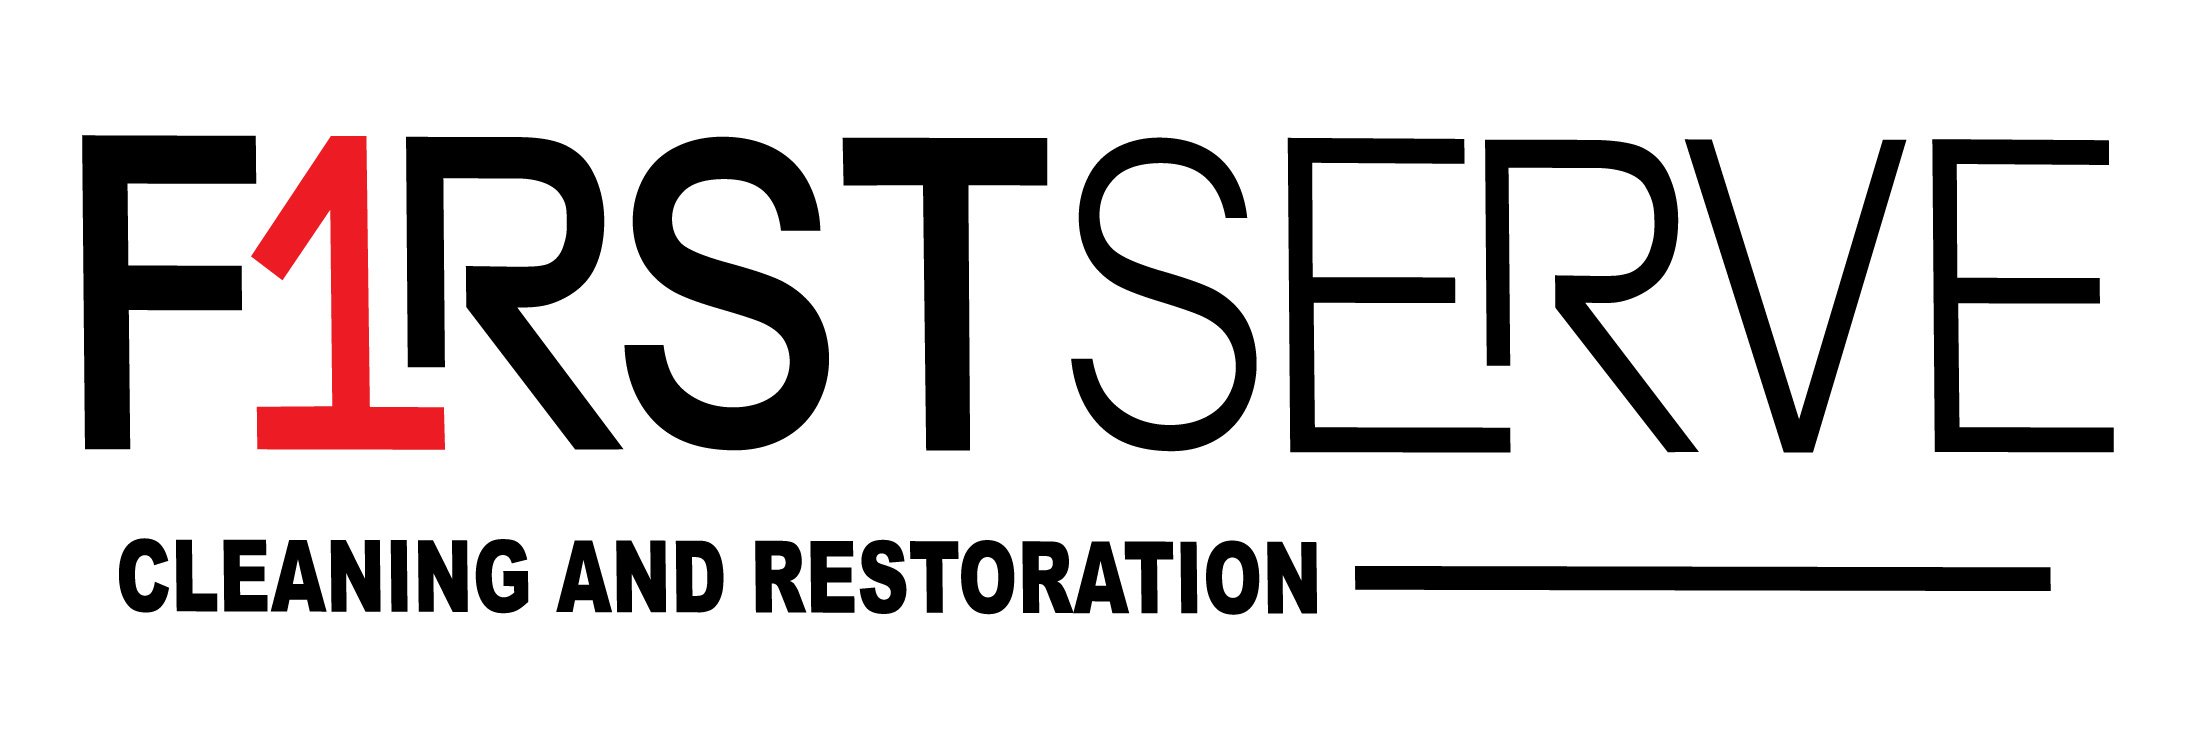 First Serve Cleaning And Restoration, LLC Logo